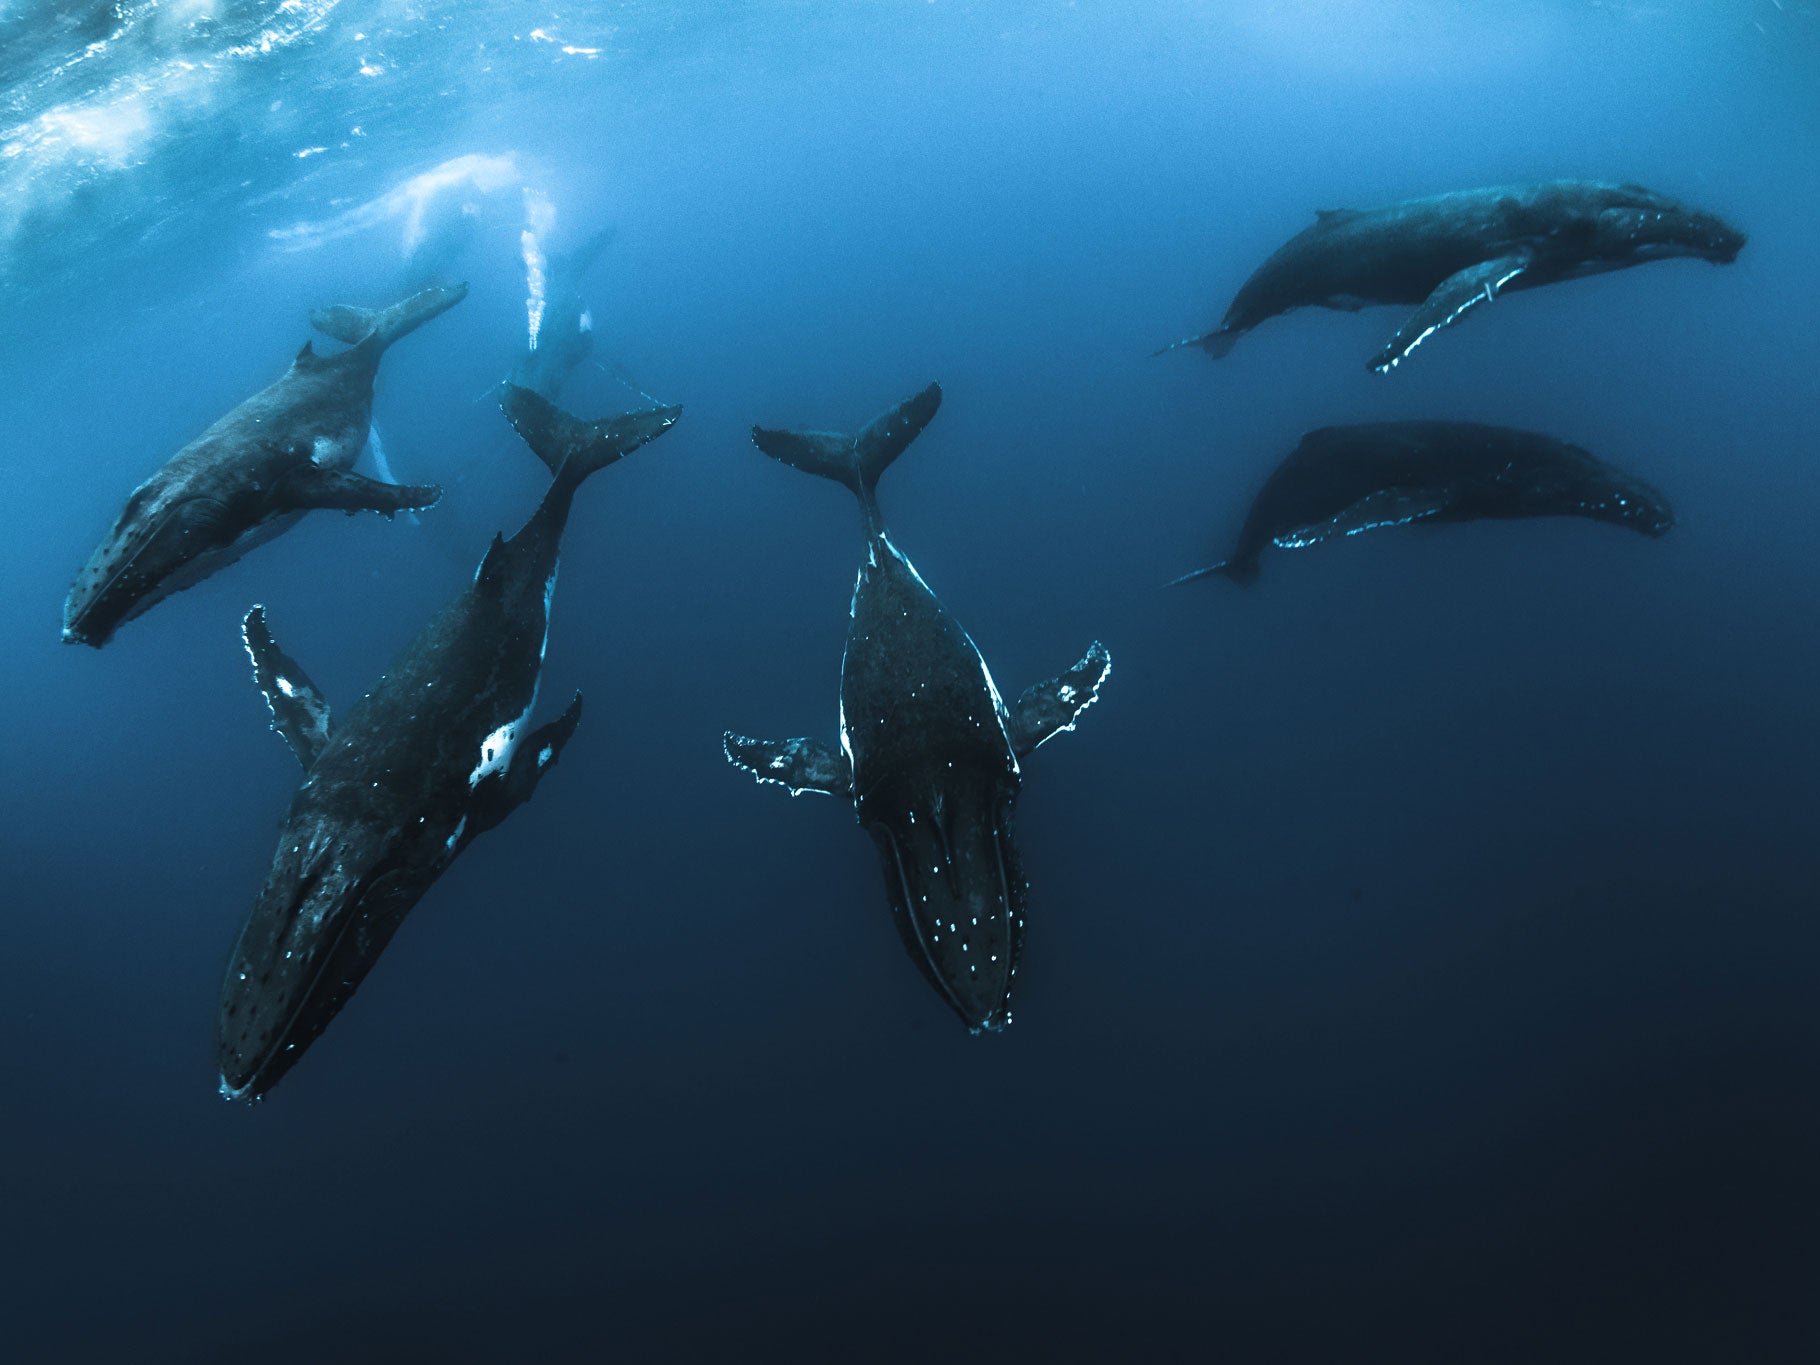 Planning a Trip to Tonga to Swim with Humpback Whales